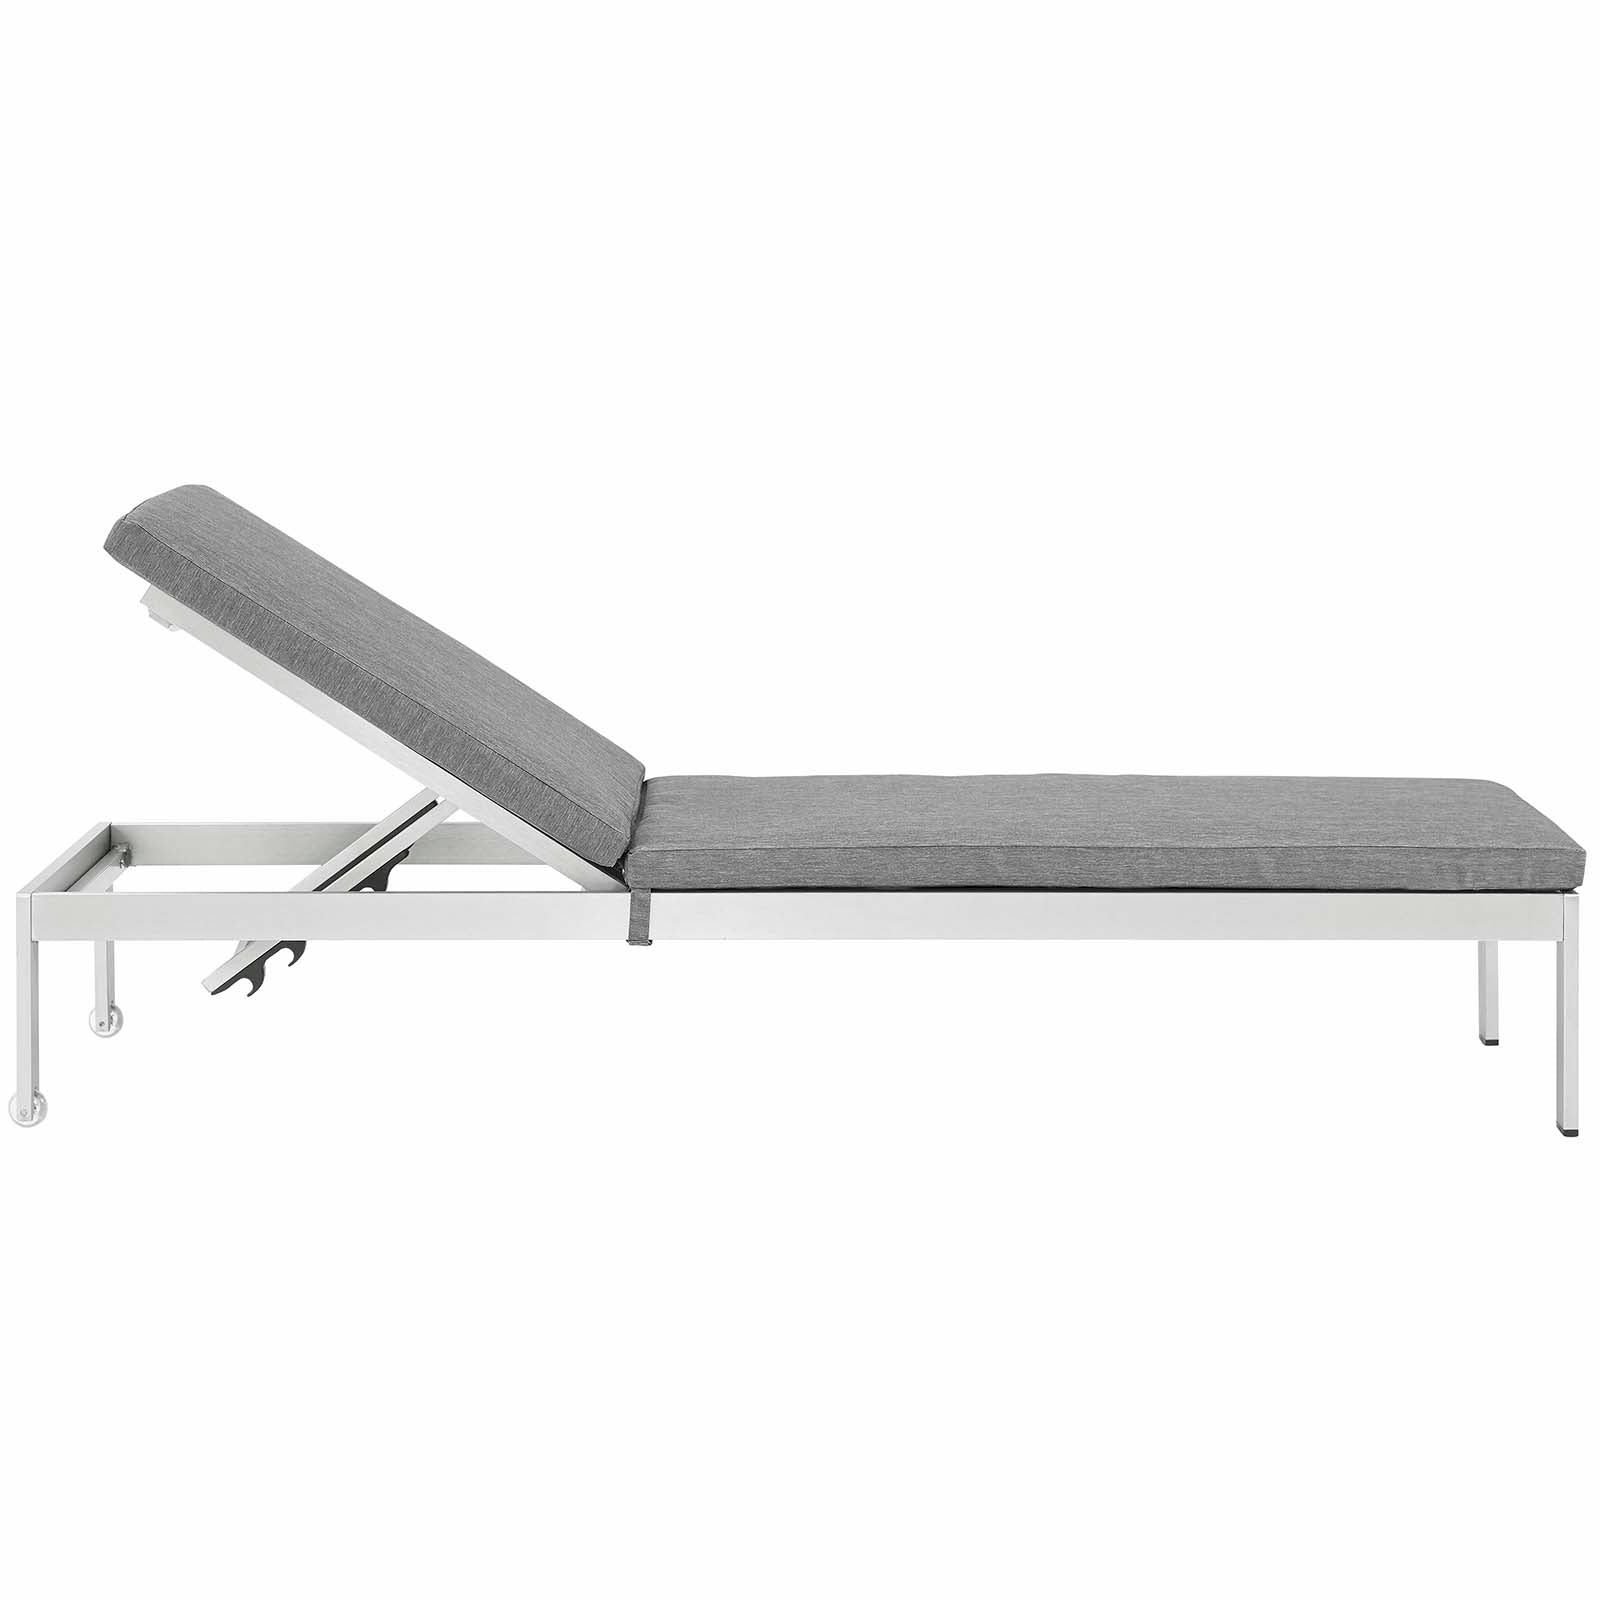 Shore Chaise with Cushions Outdoor Patio Aluminum Set of 4